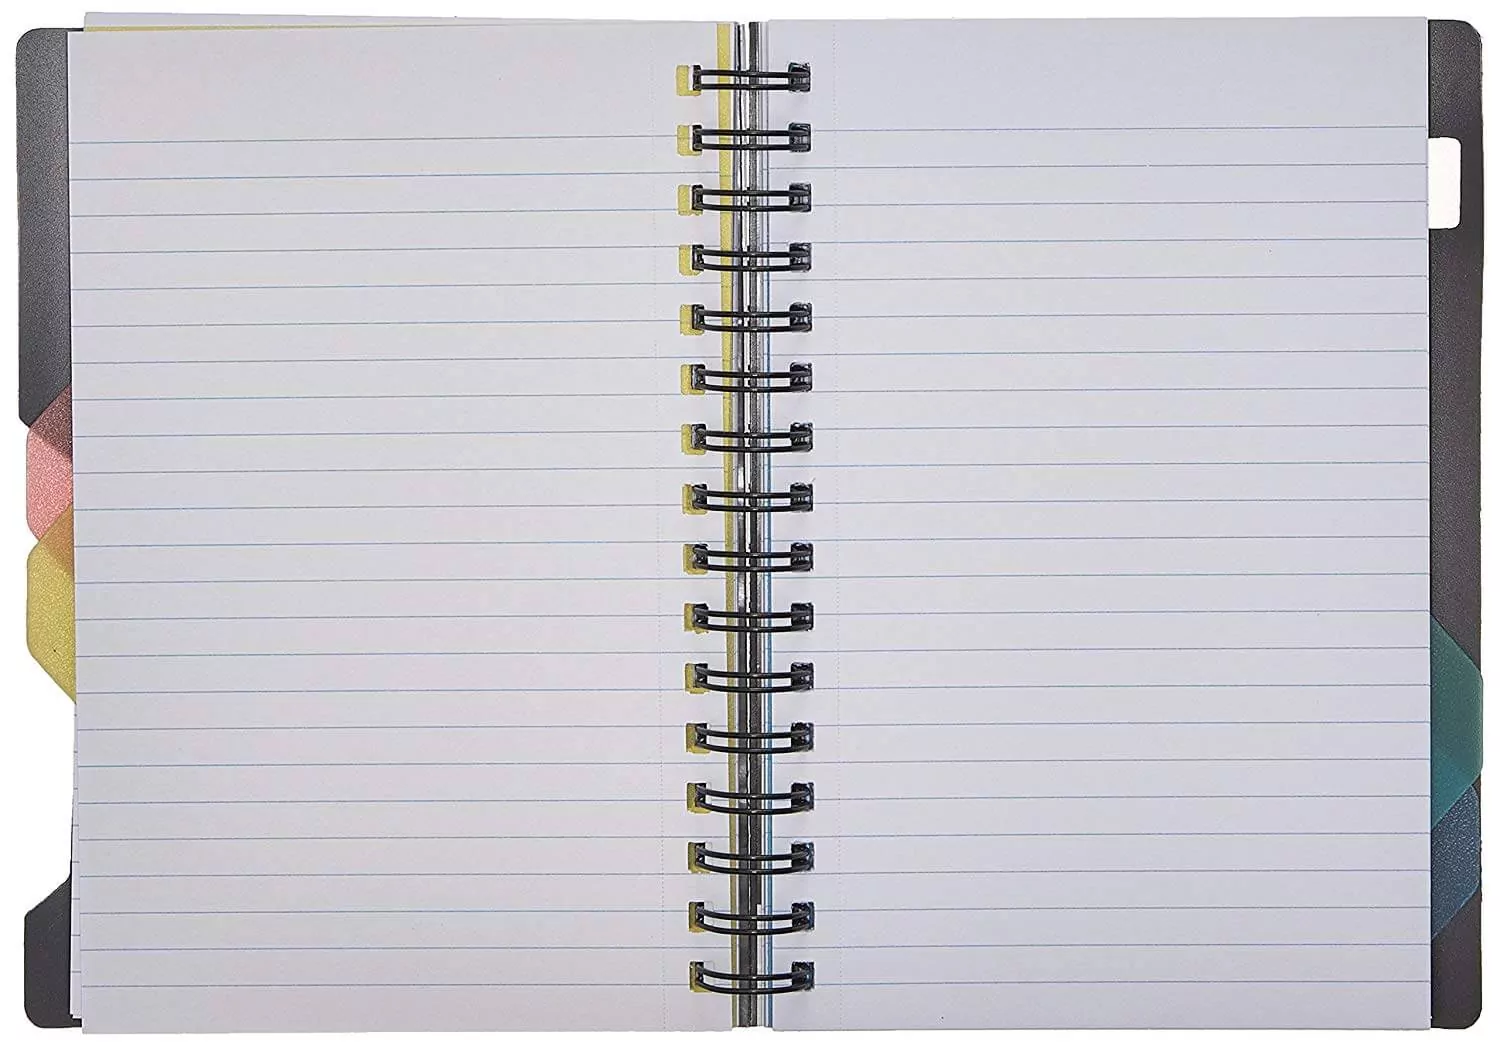 SOLO Premium 5 Subject Notebook - A5, 70 GSM, 300 pages, Single